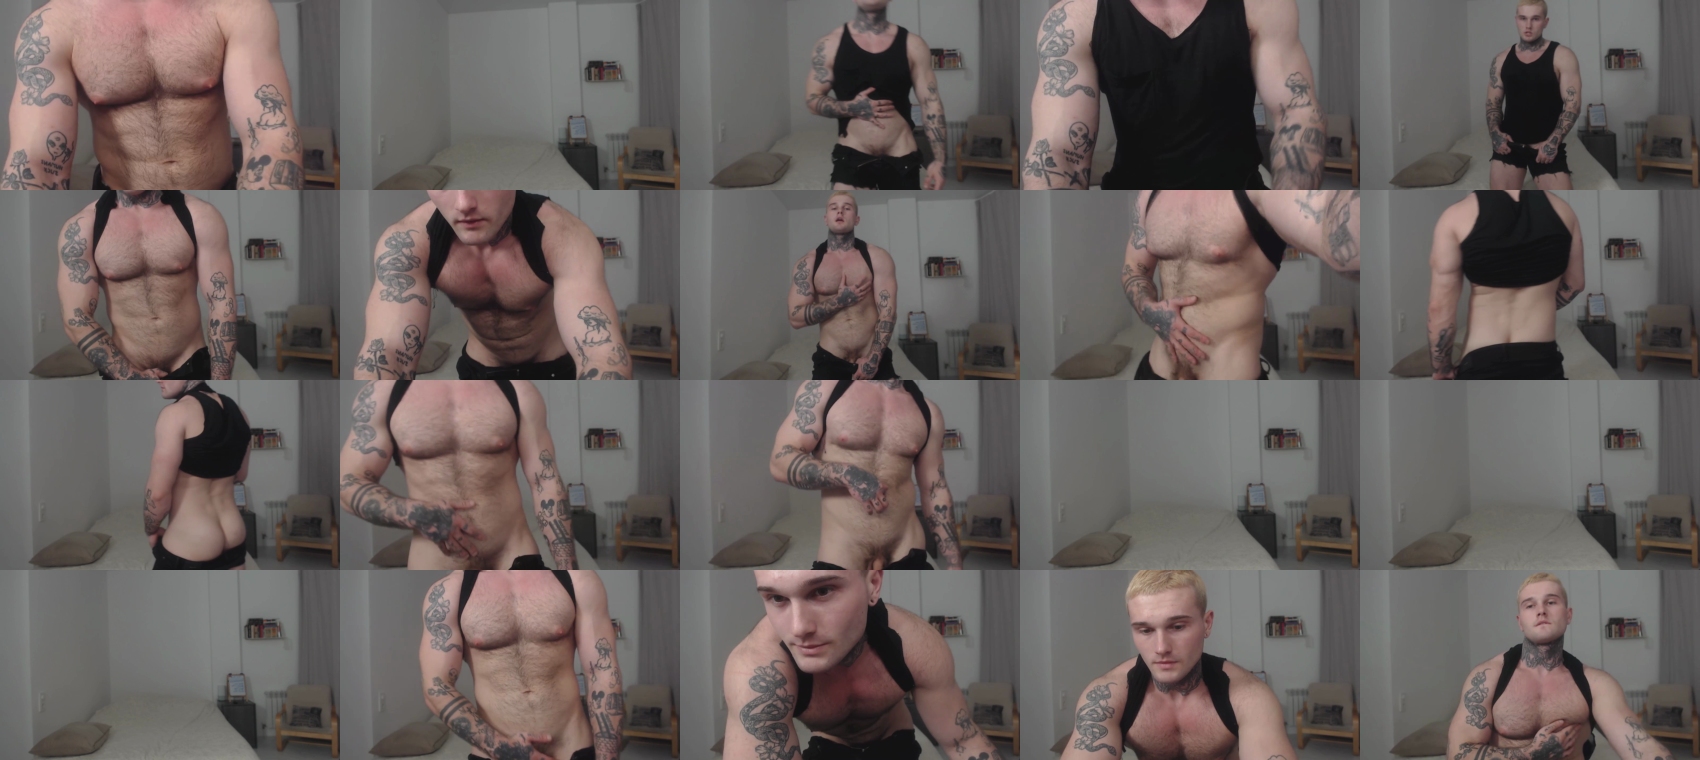 andy_hunk lush CAM SHOW @ Chaturbate 31-12-2021